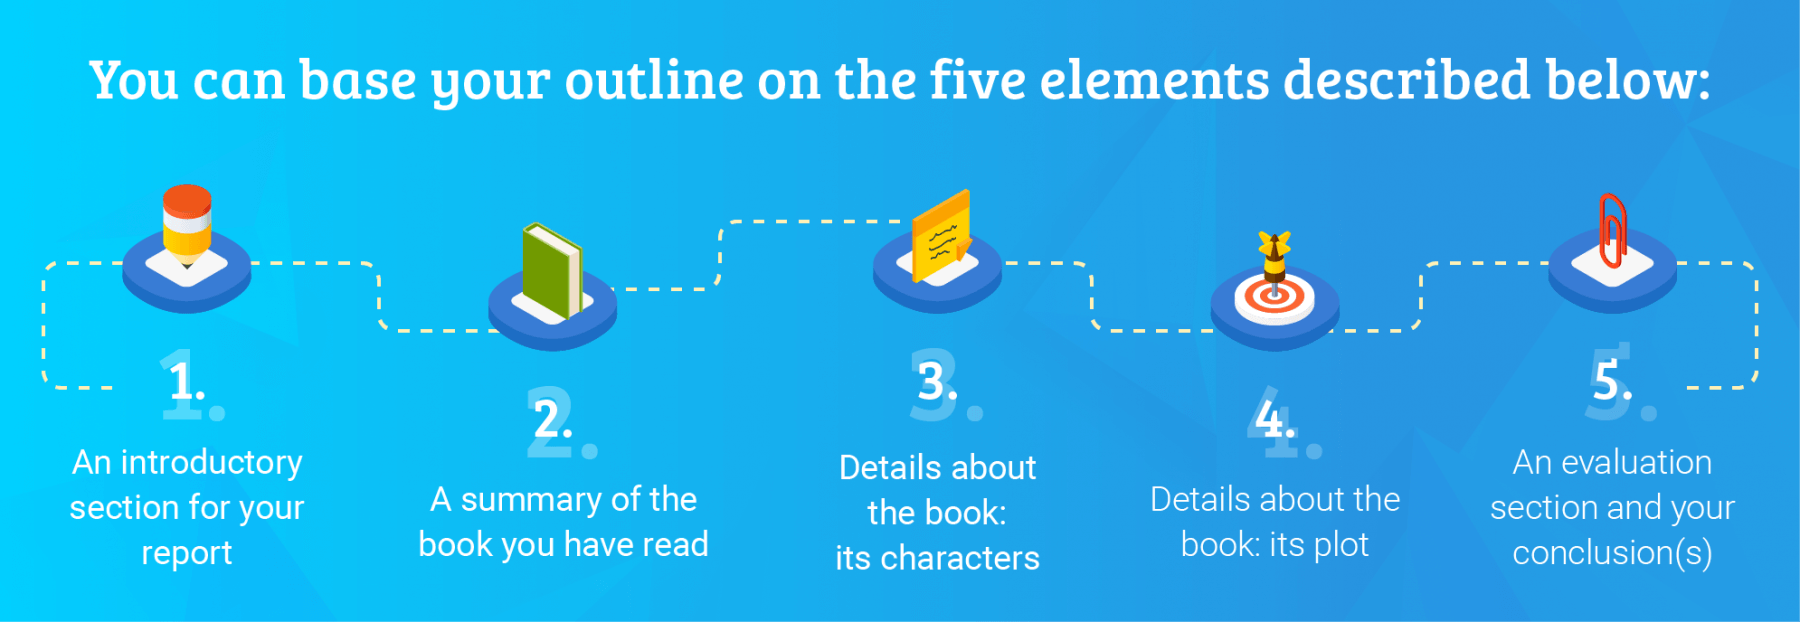 Base your outline on the five elements